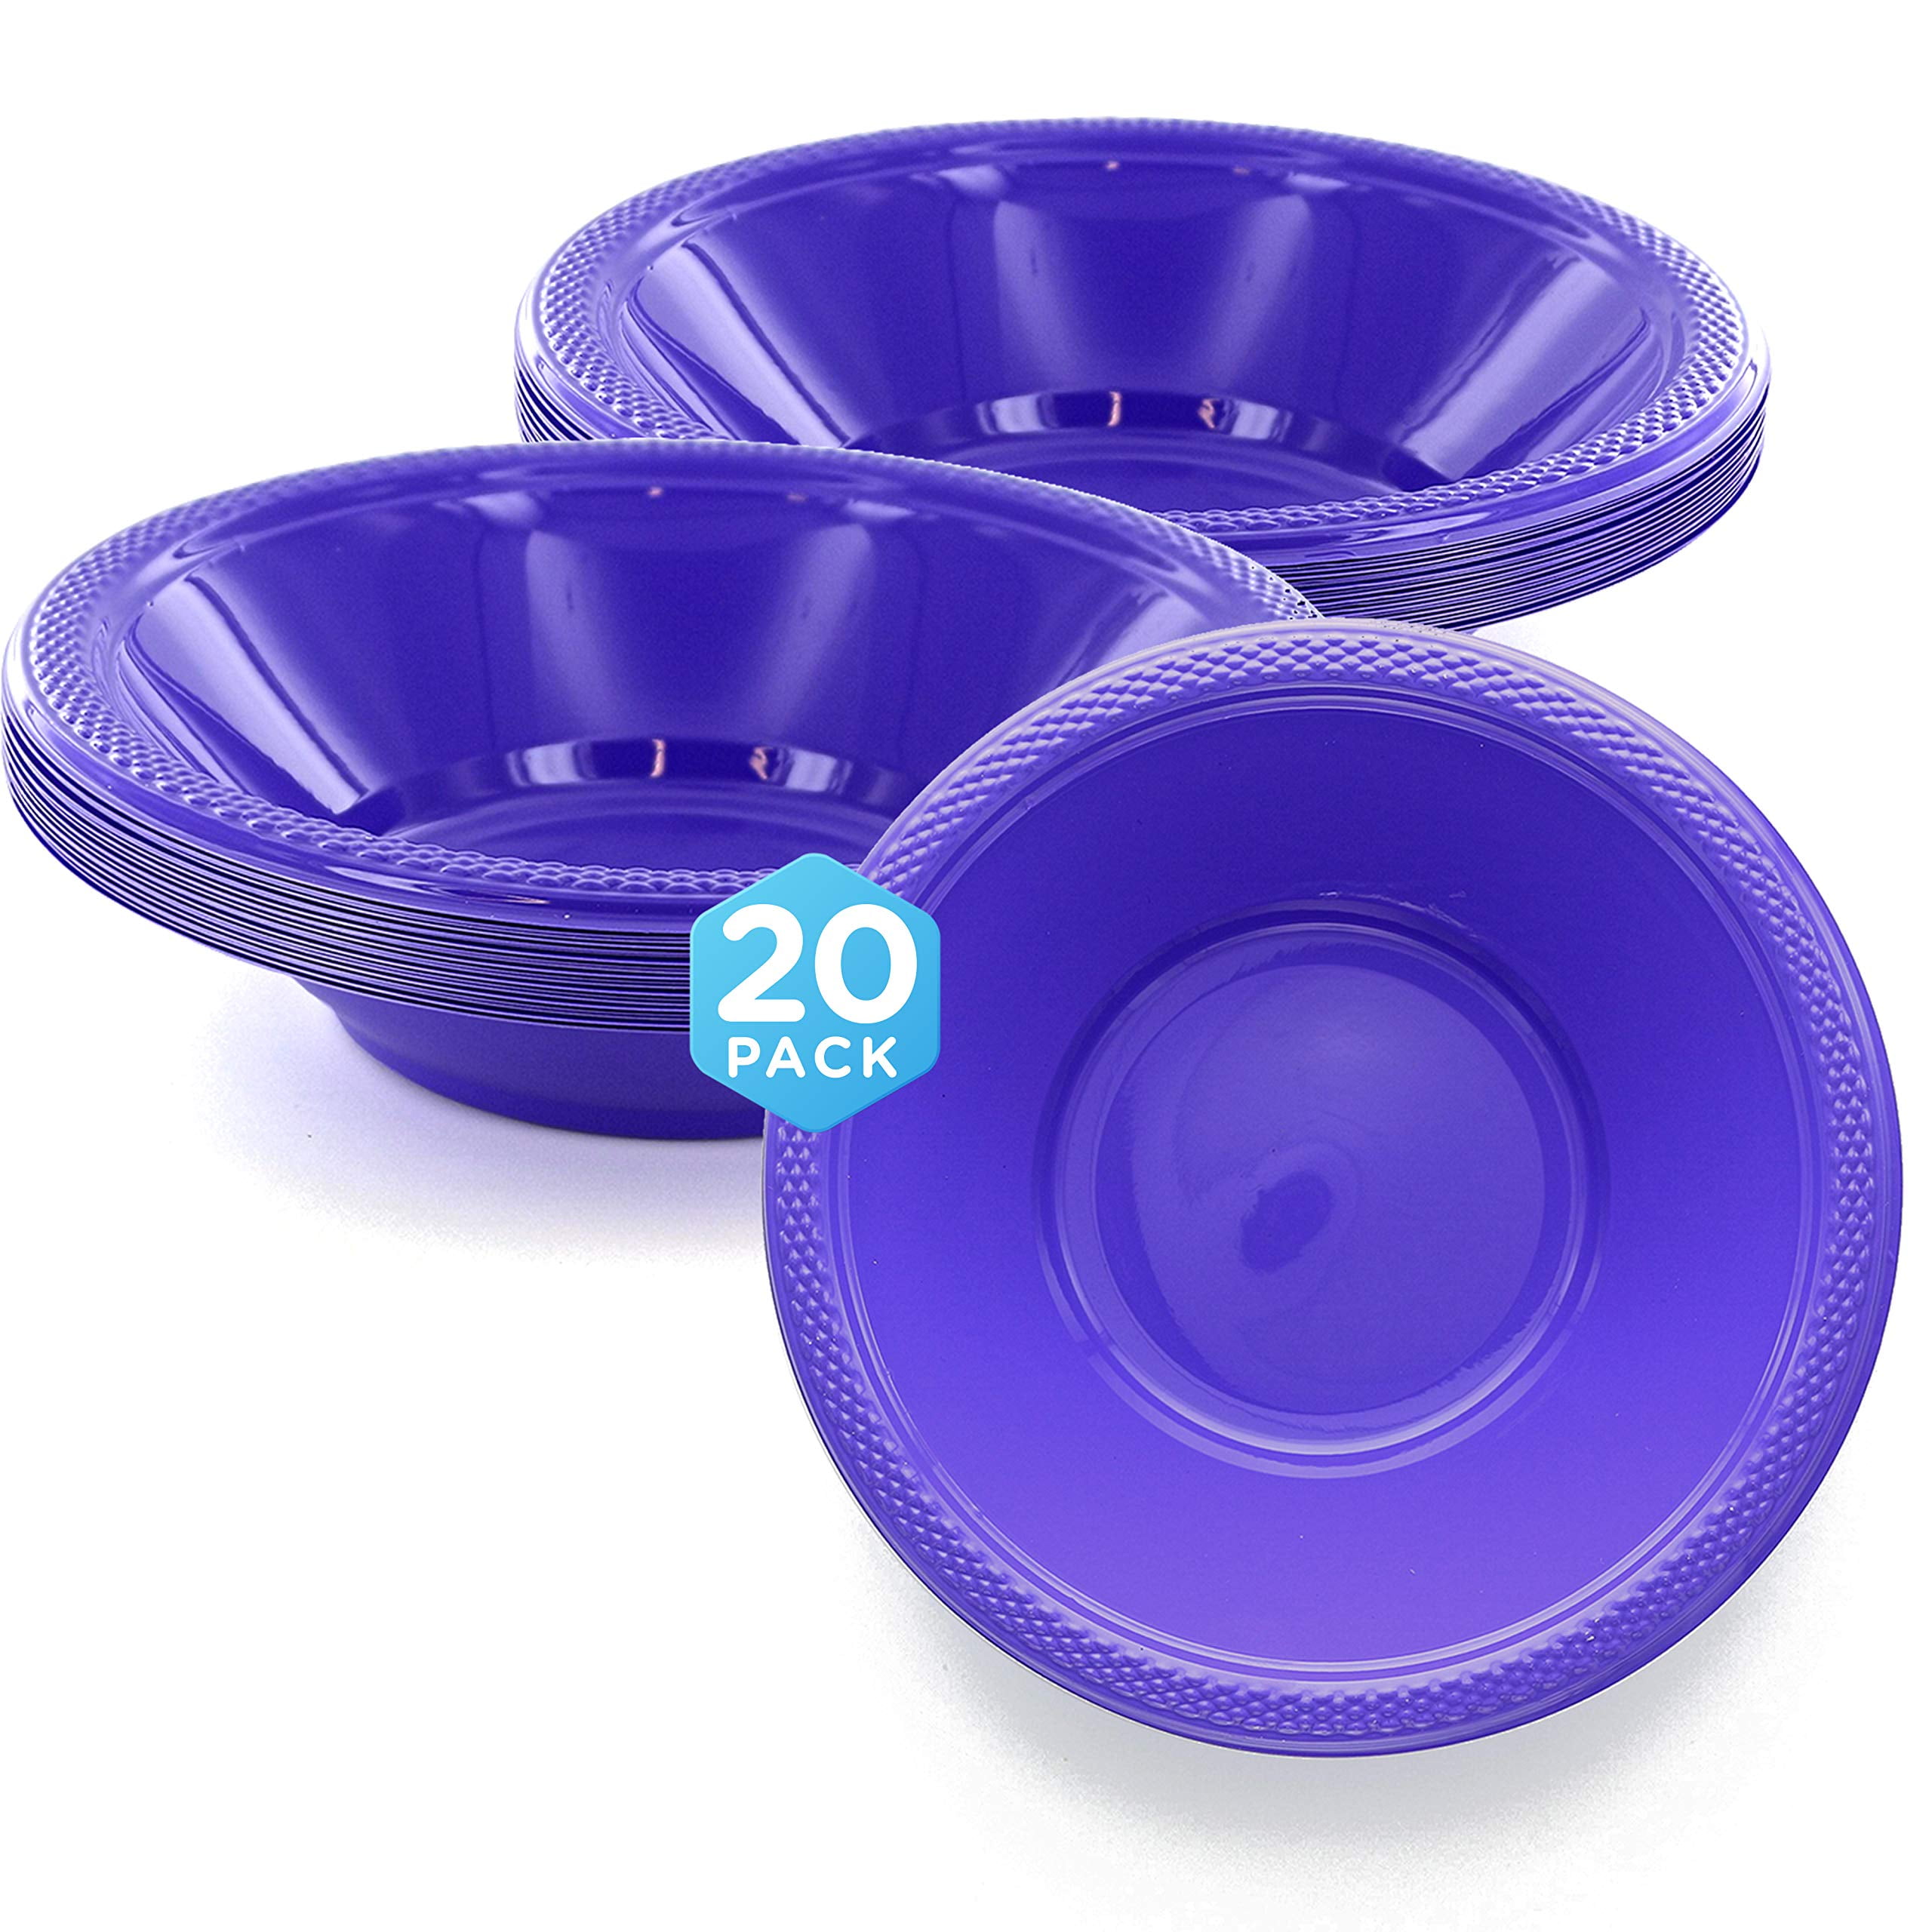 Plastic Bowls With Lids Purple, Blue, Light Blue Collection Of 4, 6, 8 or 12